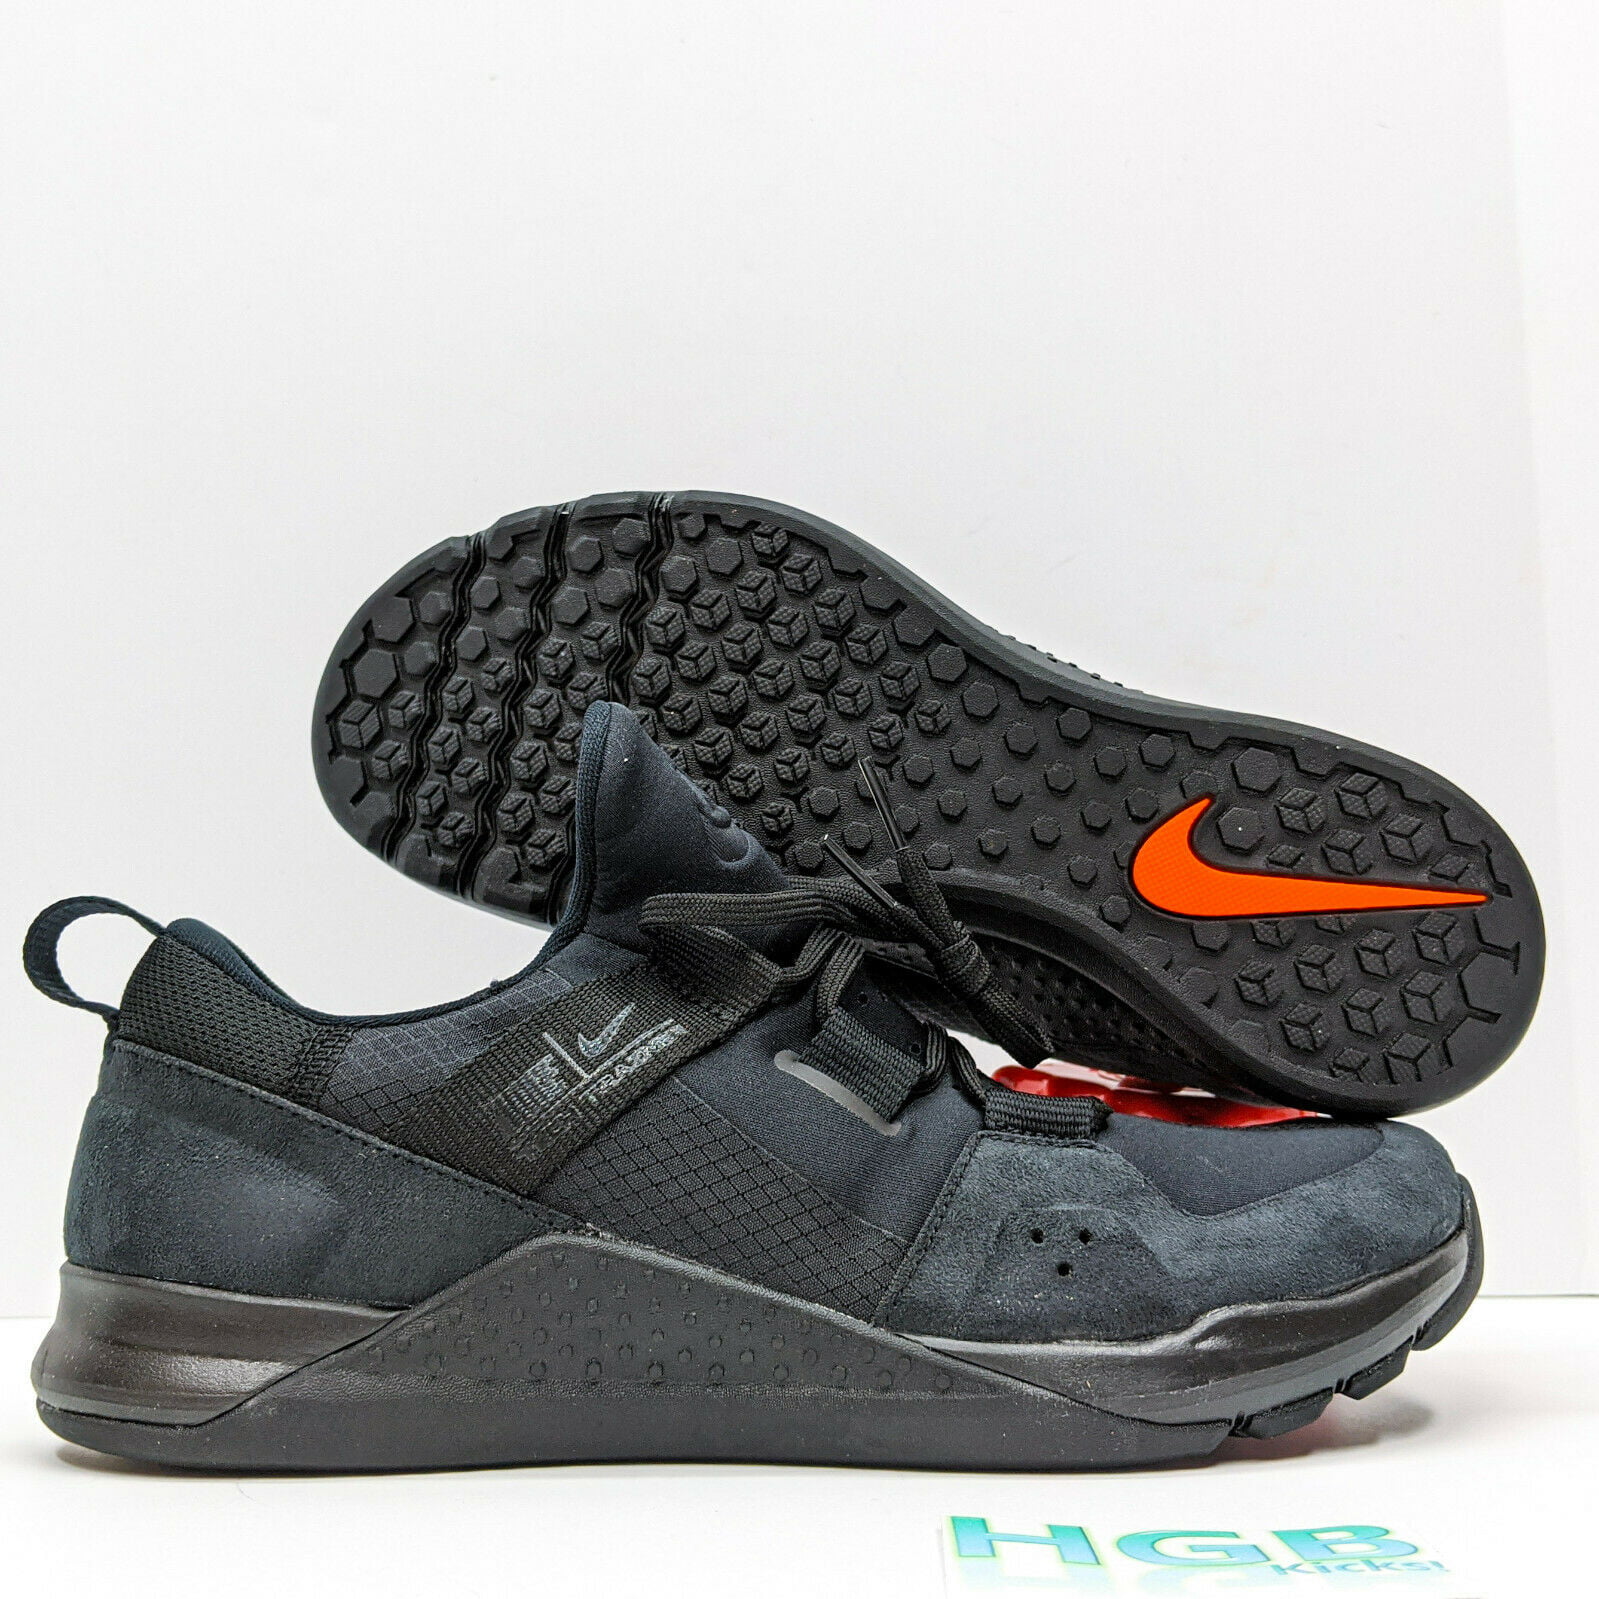 nike tech trainer shoes review